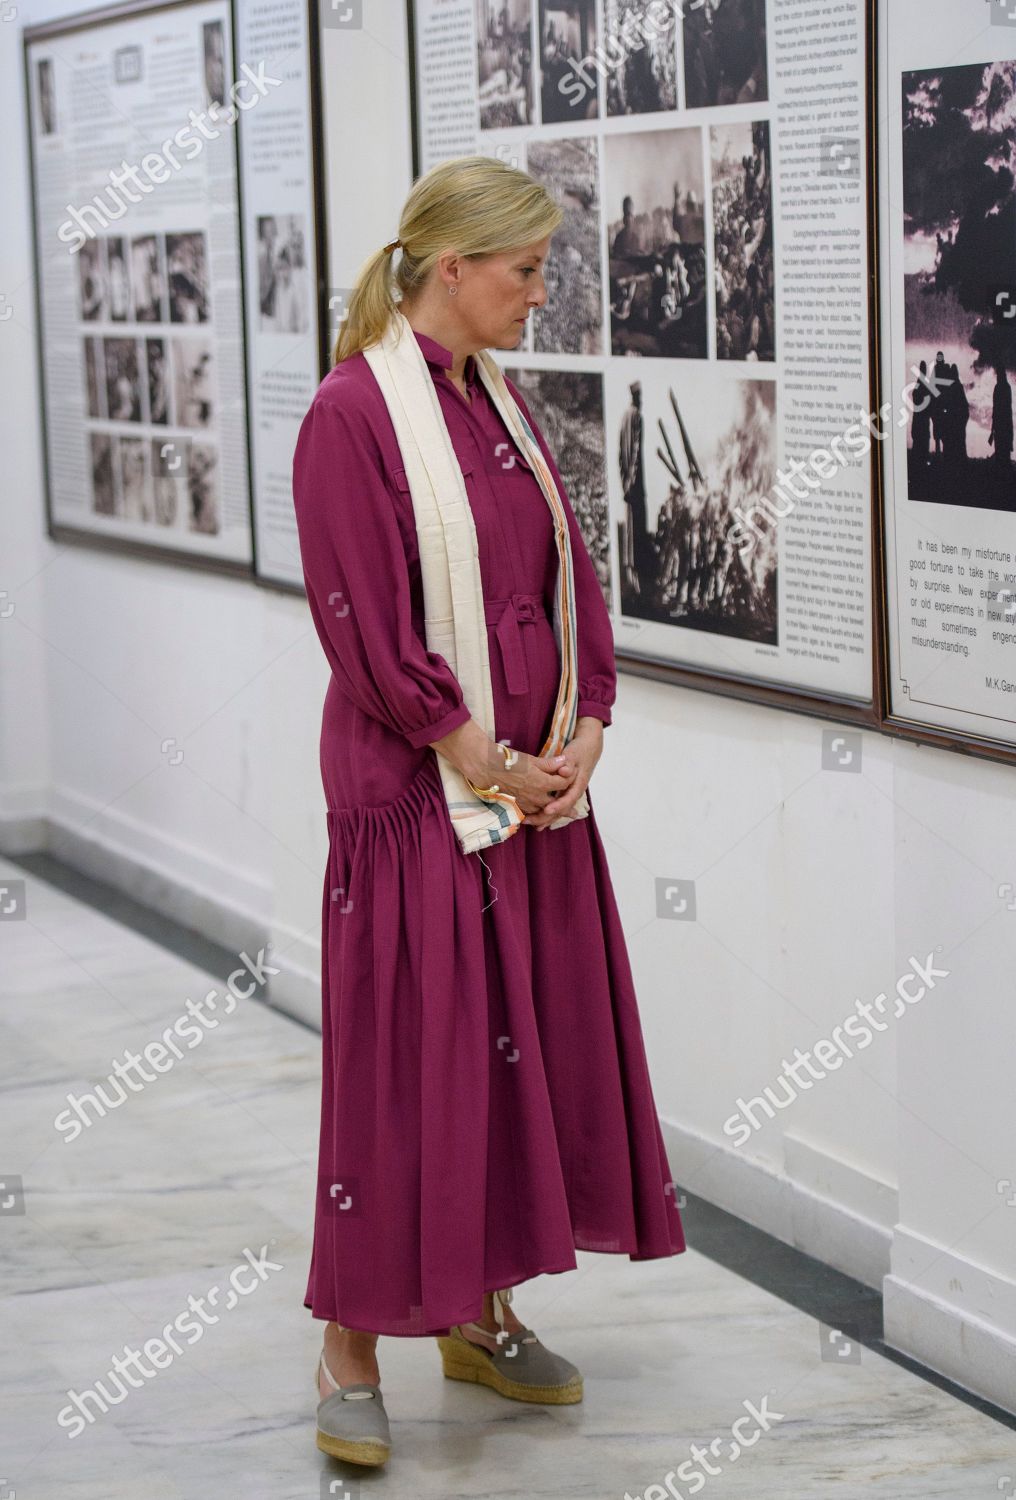 sophie-countess-of-wessex-visit-to-india-shutterstock-editorial-10227195dr.jpg